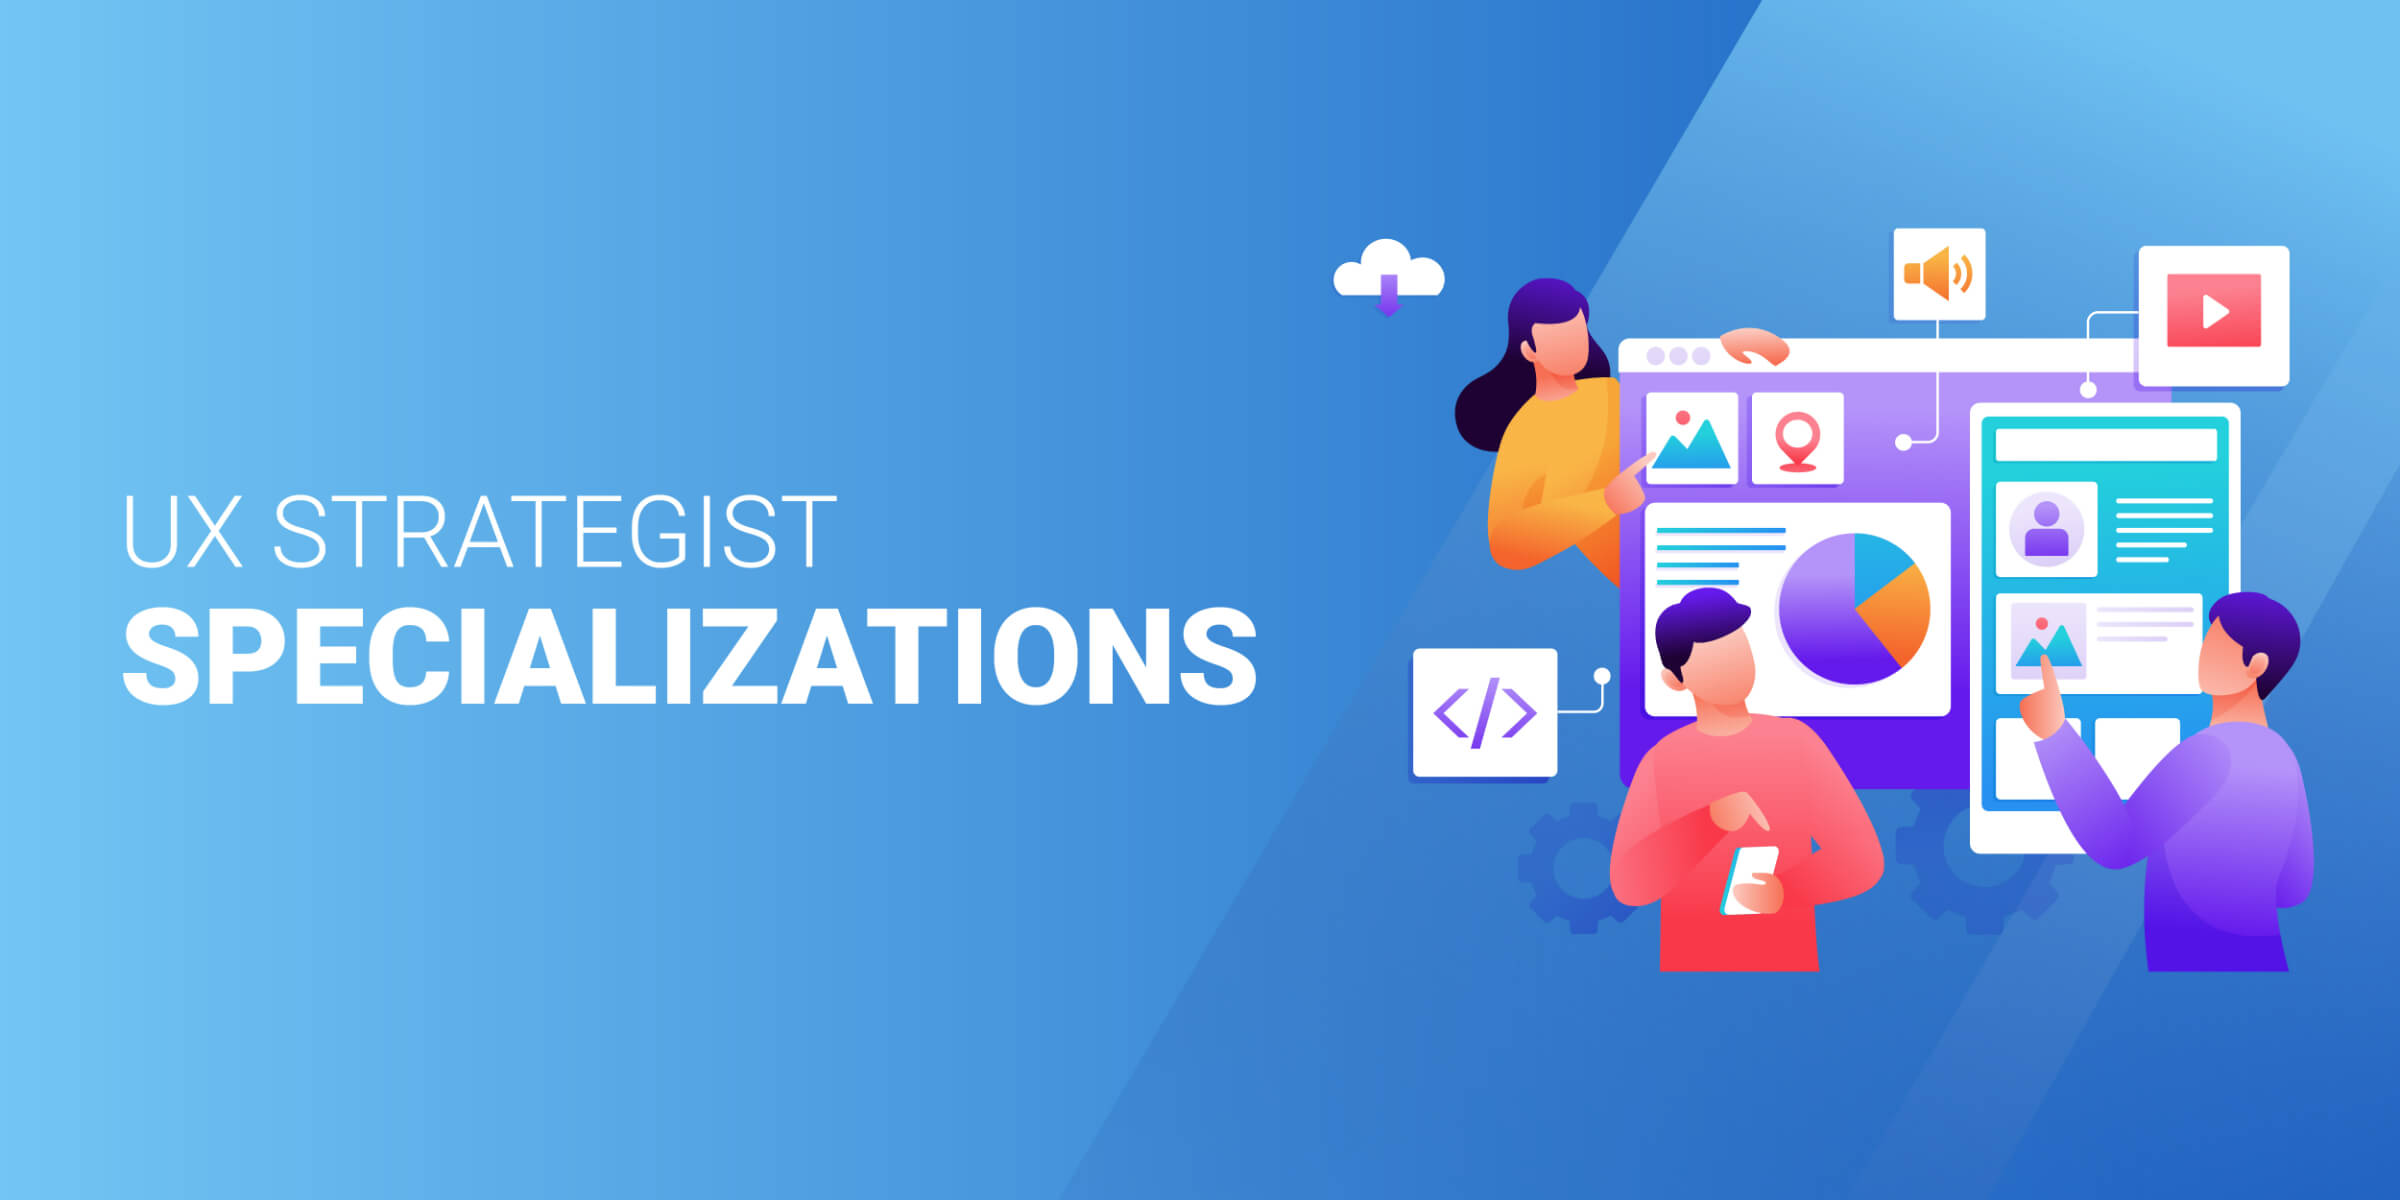 UX Strategist Specializations